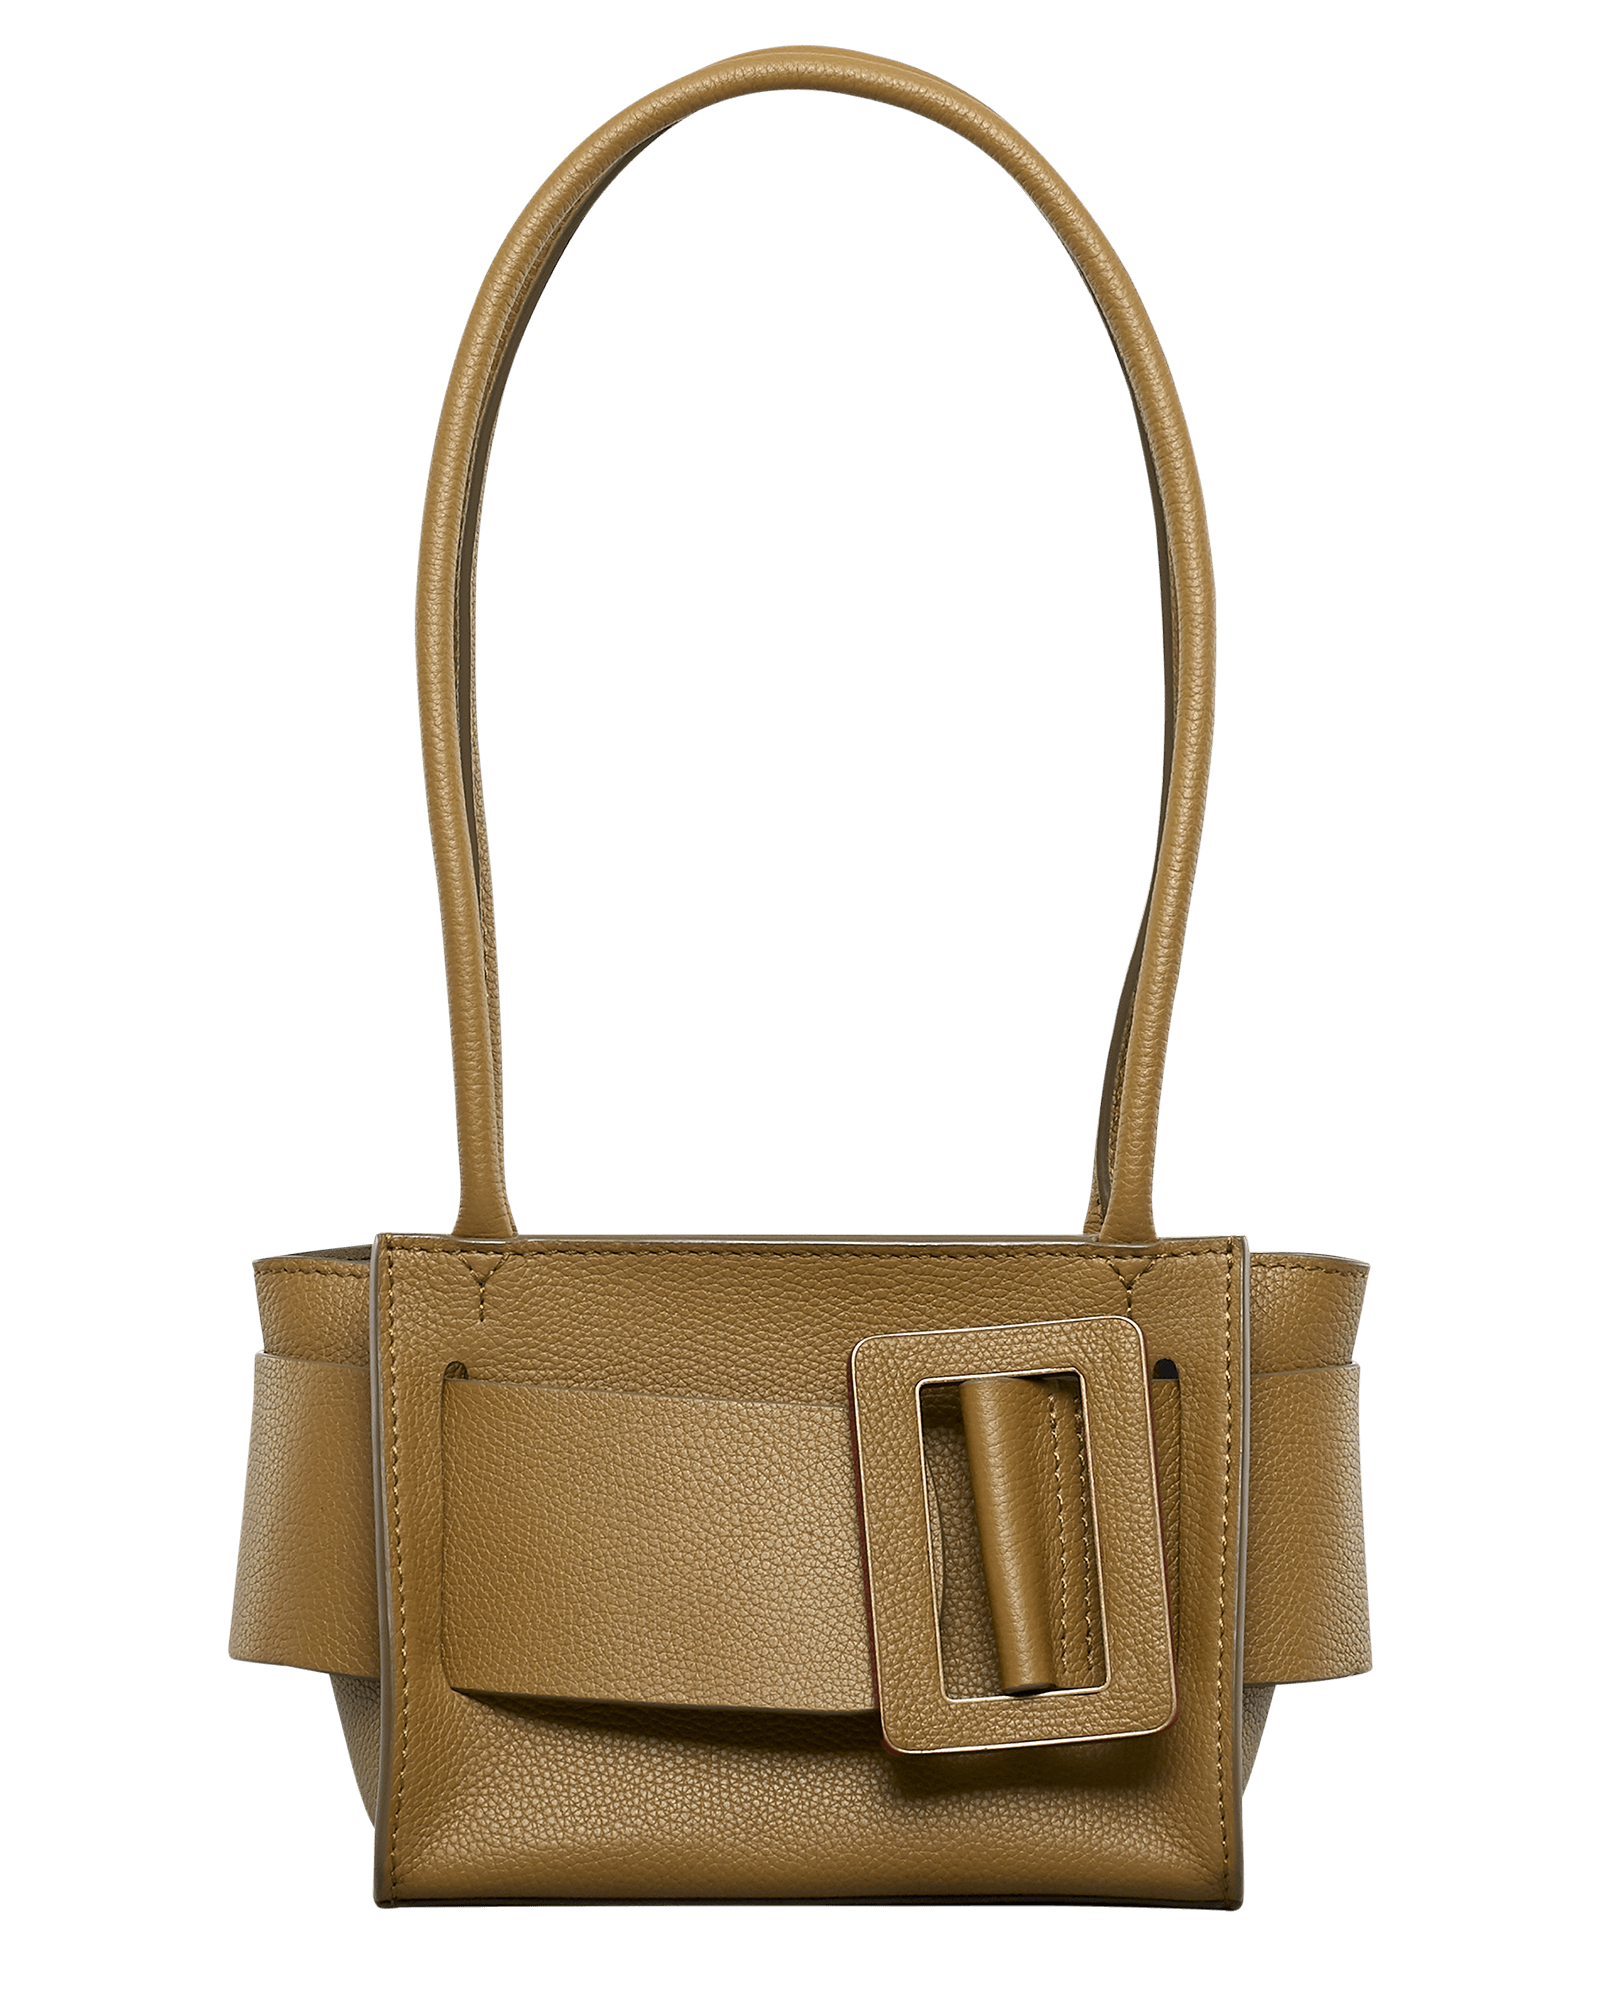 Open, brown, natural grain leather handbag with an oversized buckle on the front, twin carry handles and a top zip fastener.